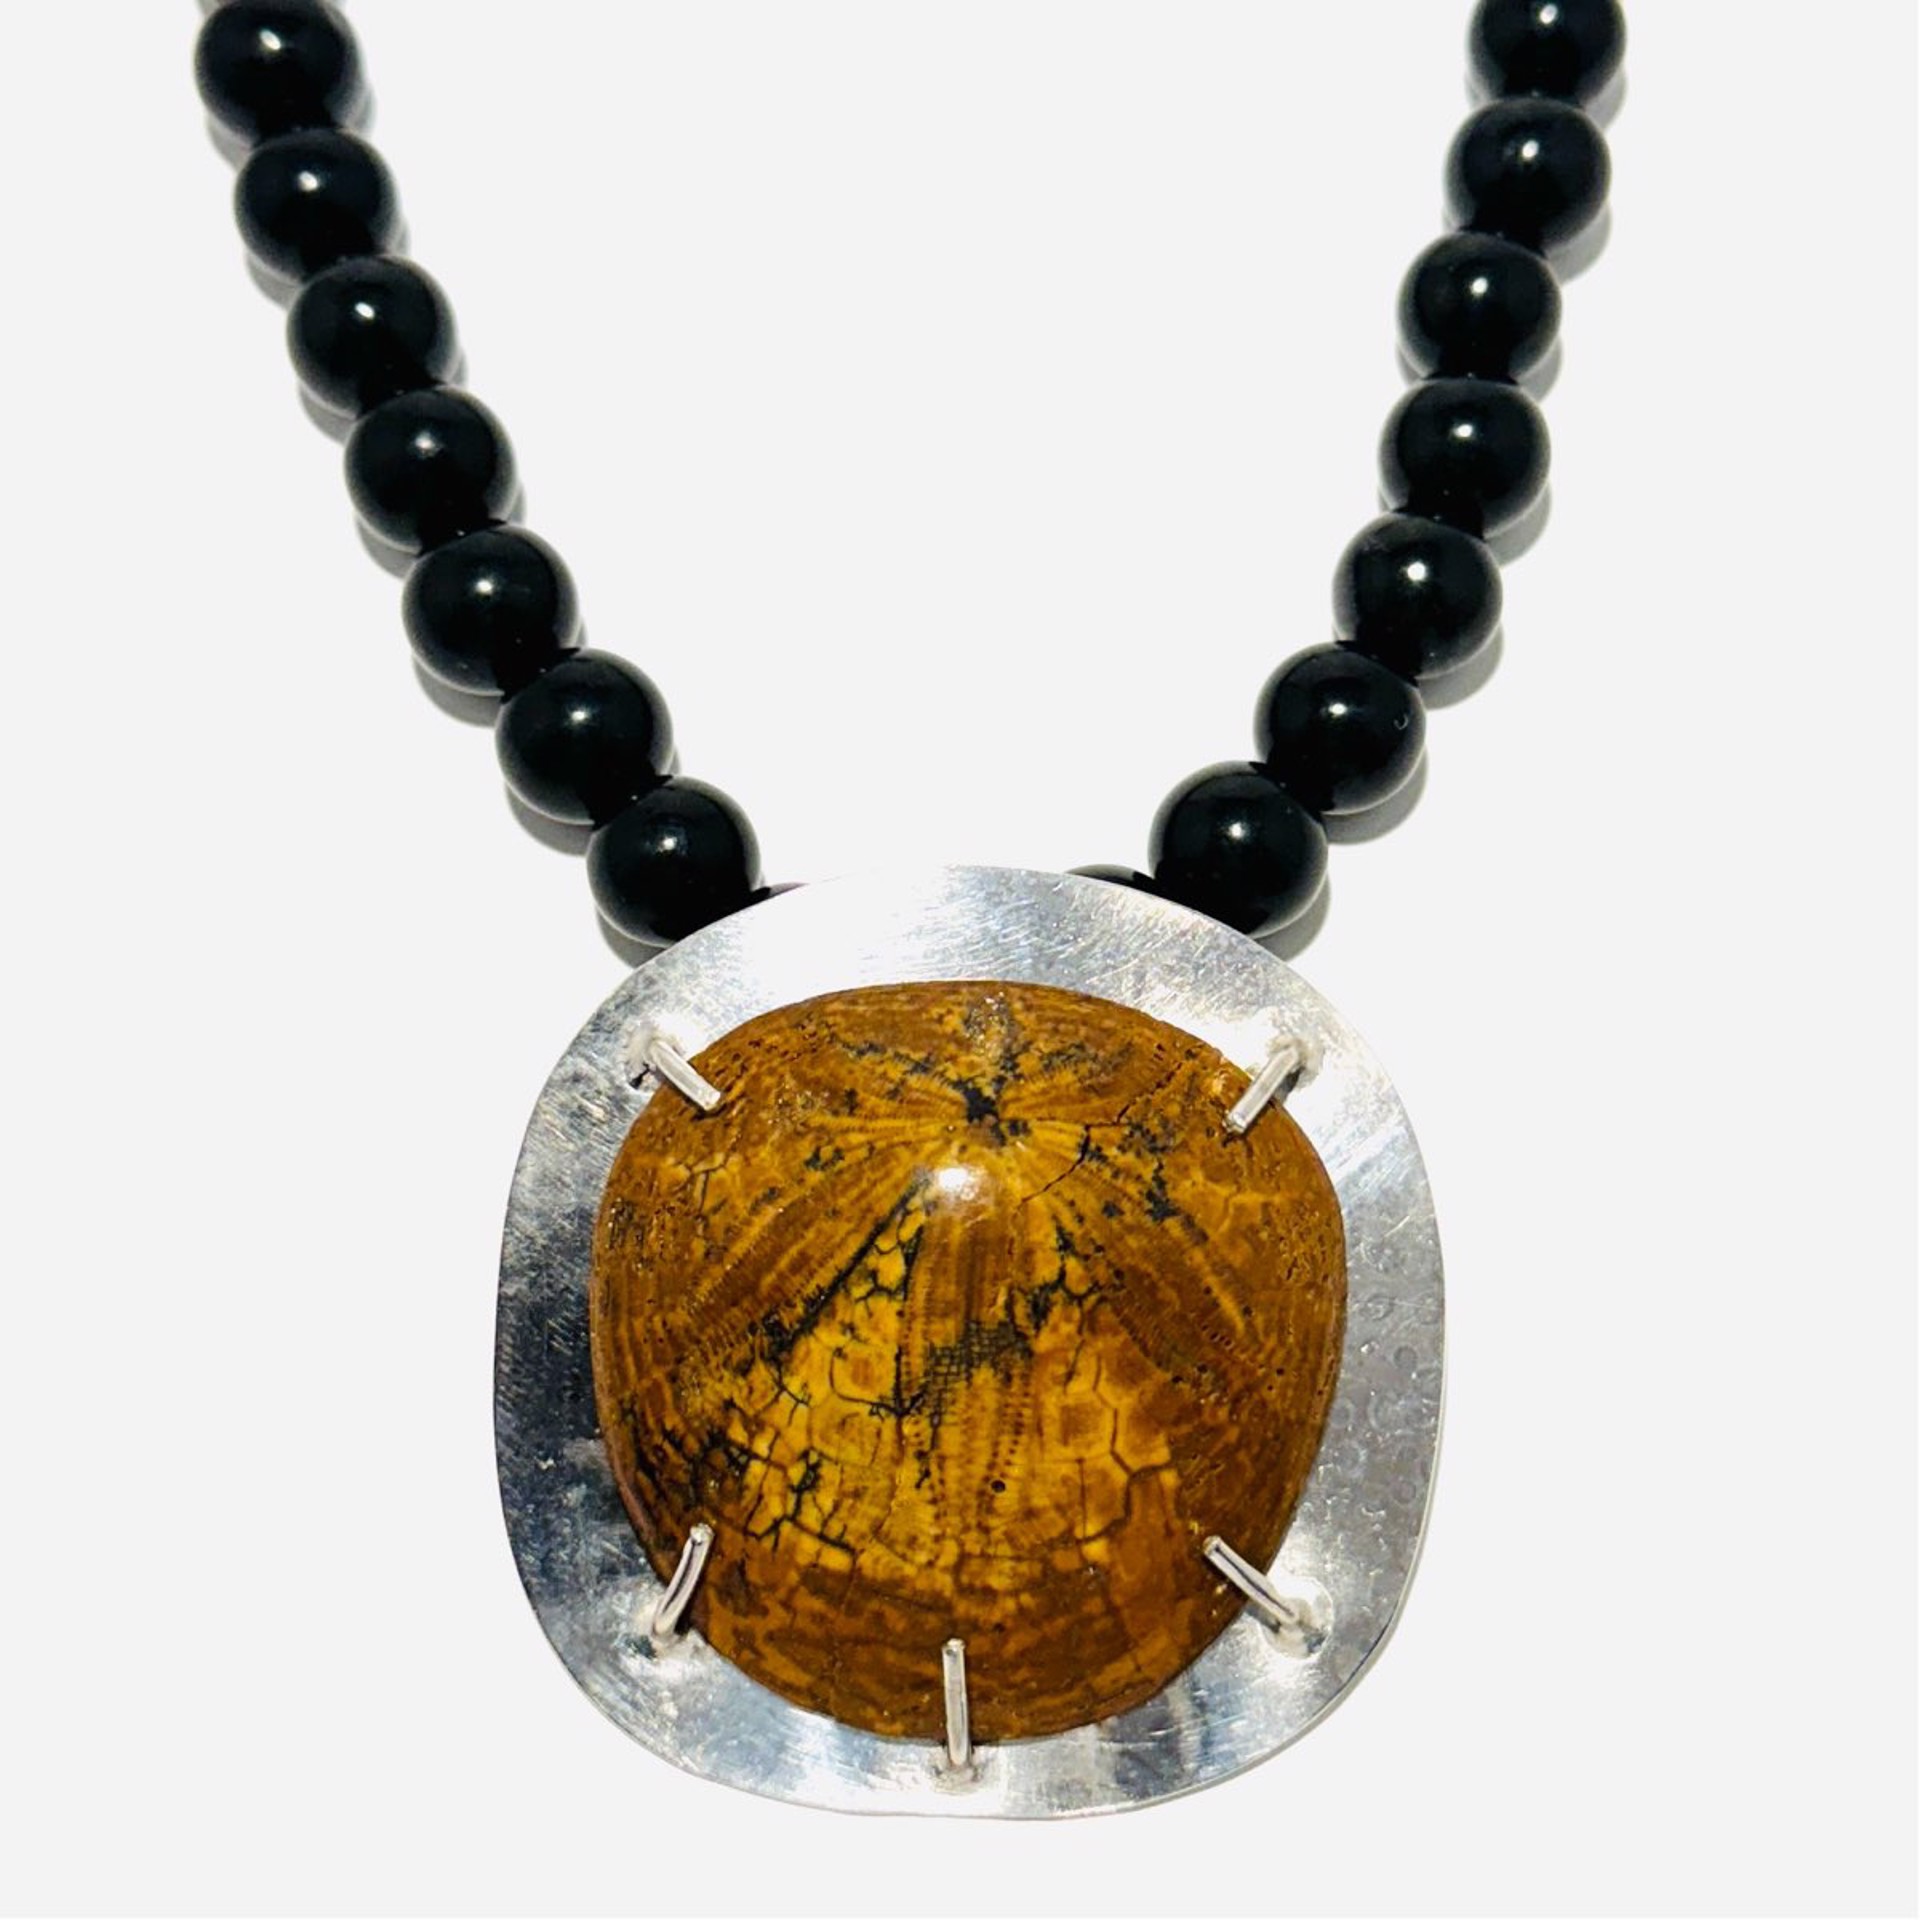 Fossilized Sand Dollar on Sterling Pendant, Large Obsidian Bead Necklace AB23-122 by Anne Bivens